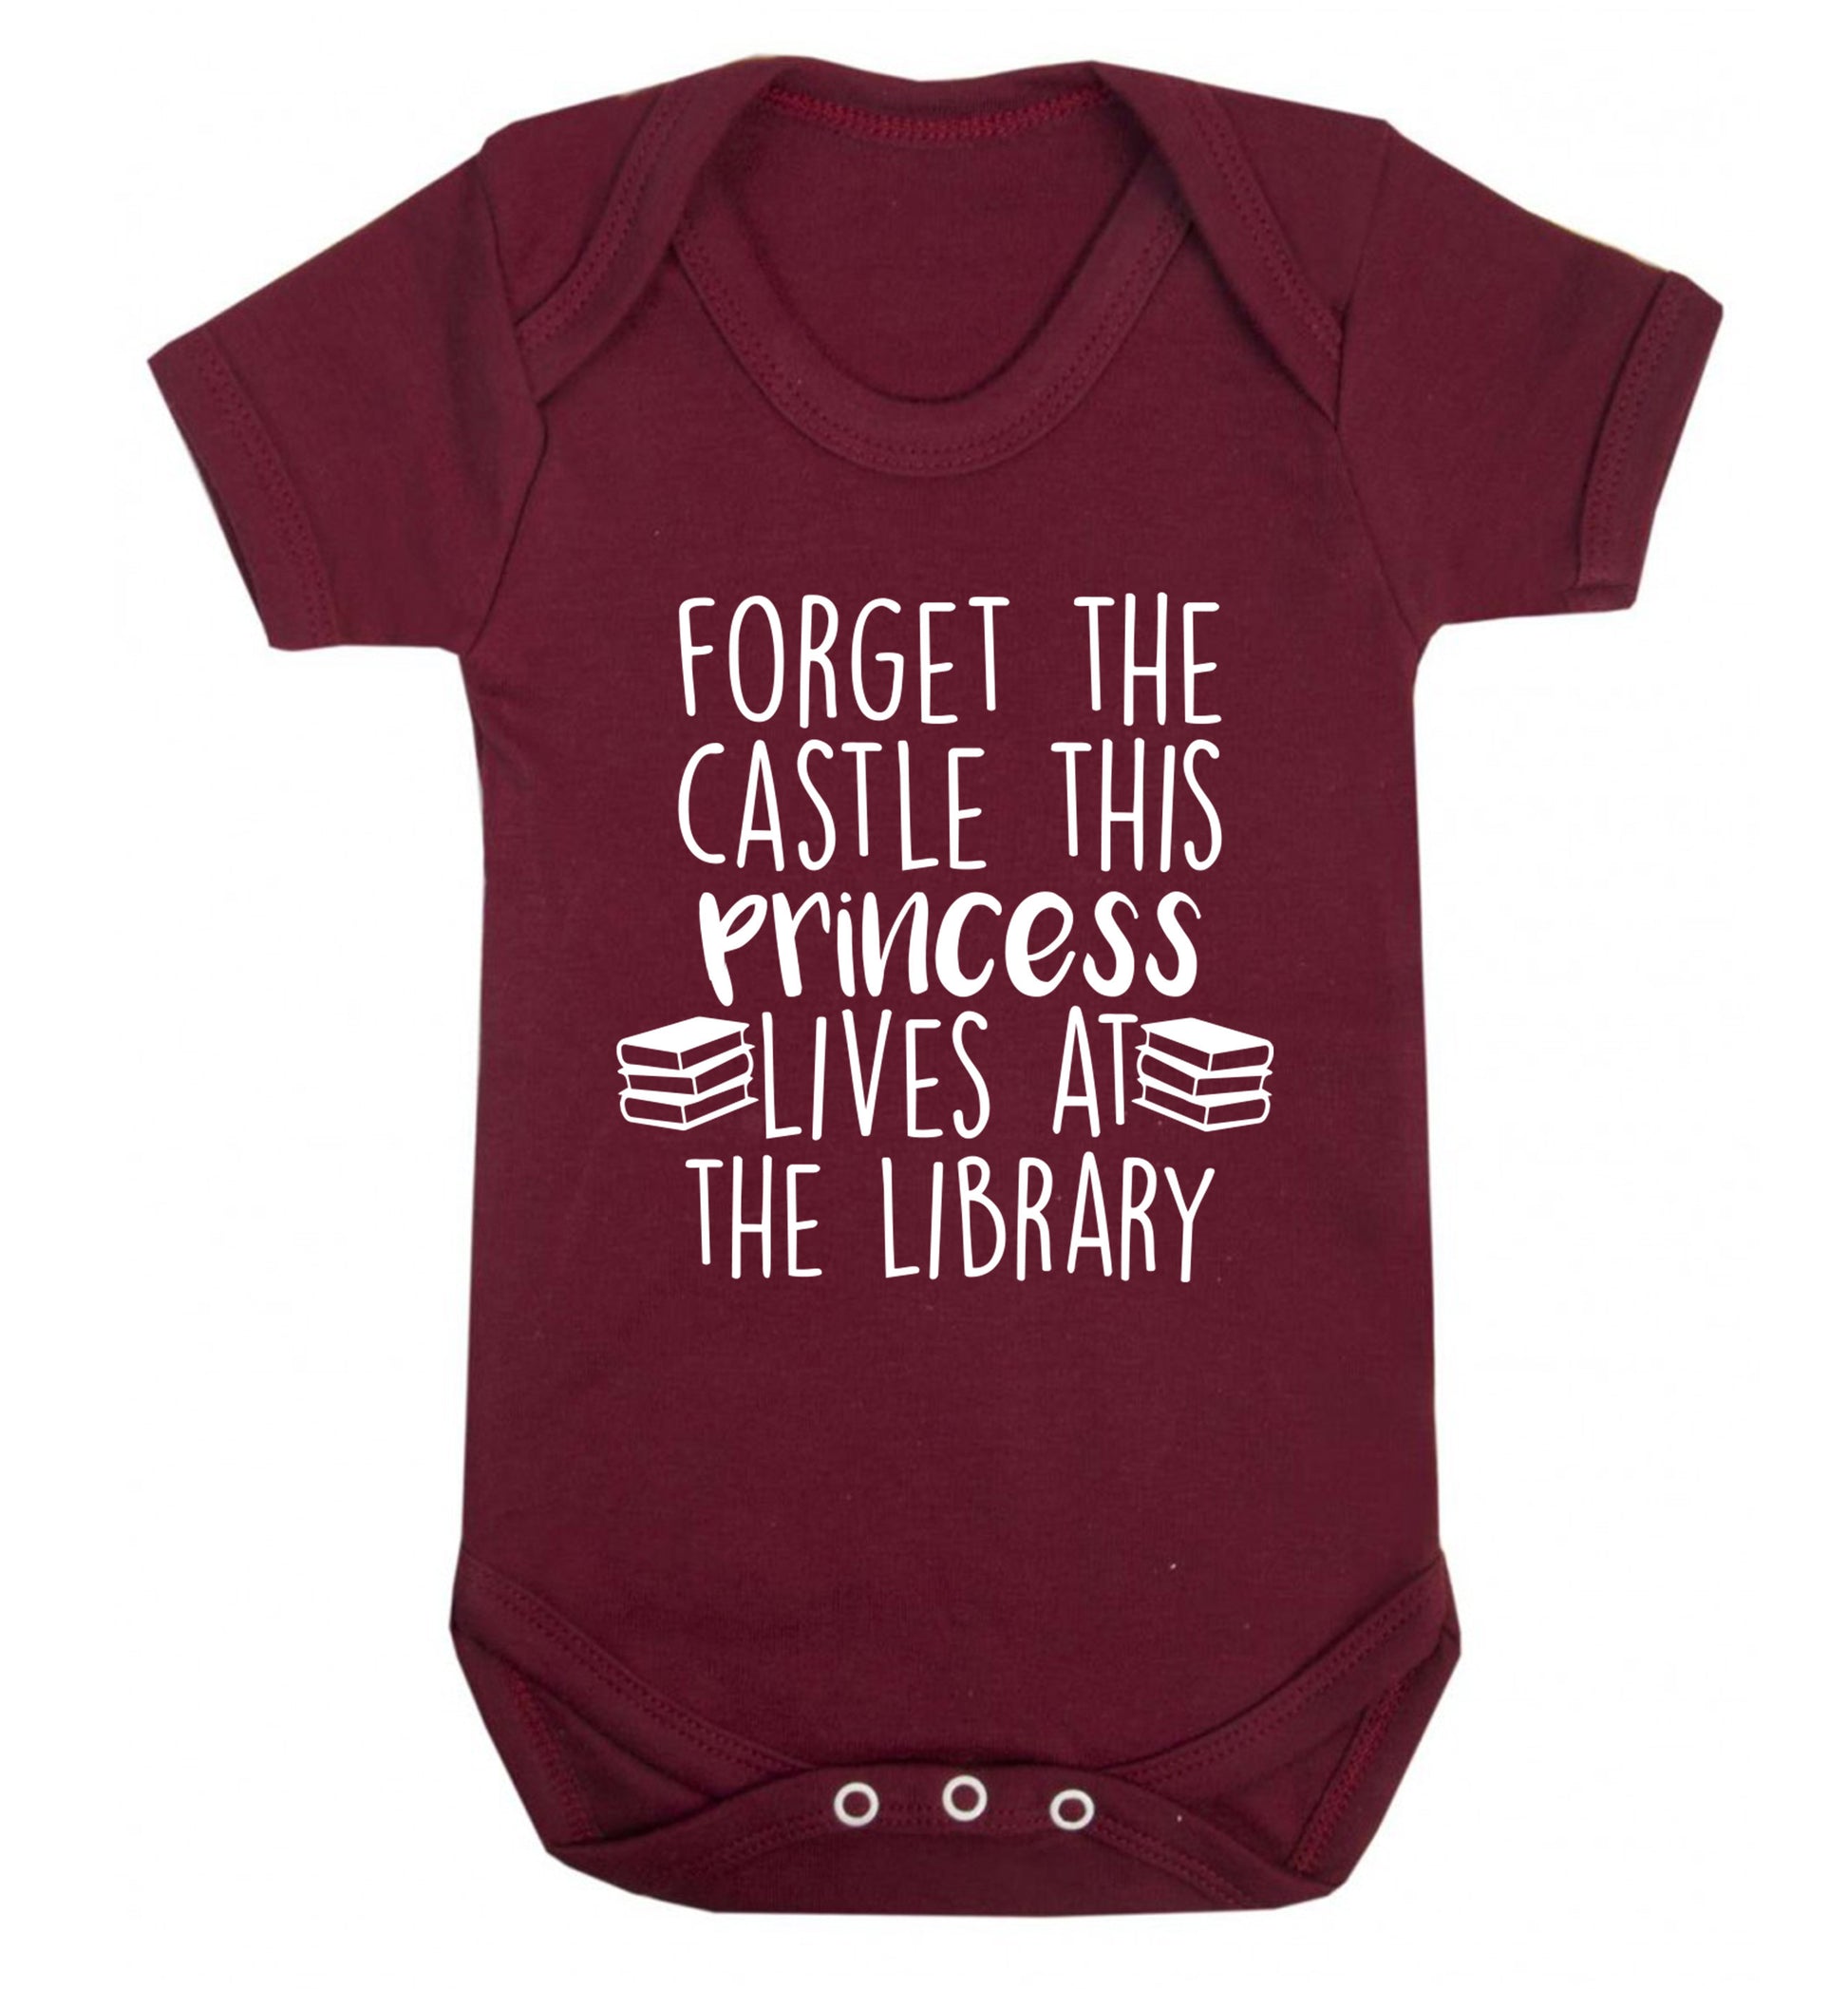 Forget the castle this princess lives at the library Baby Vest maroon 18-24 months